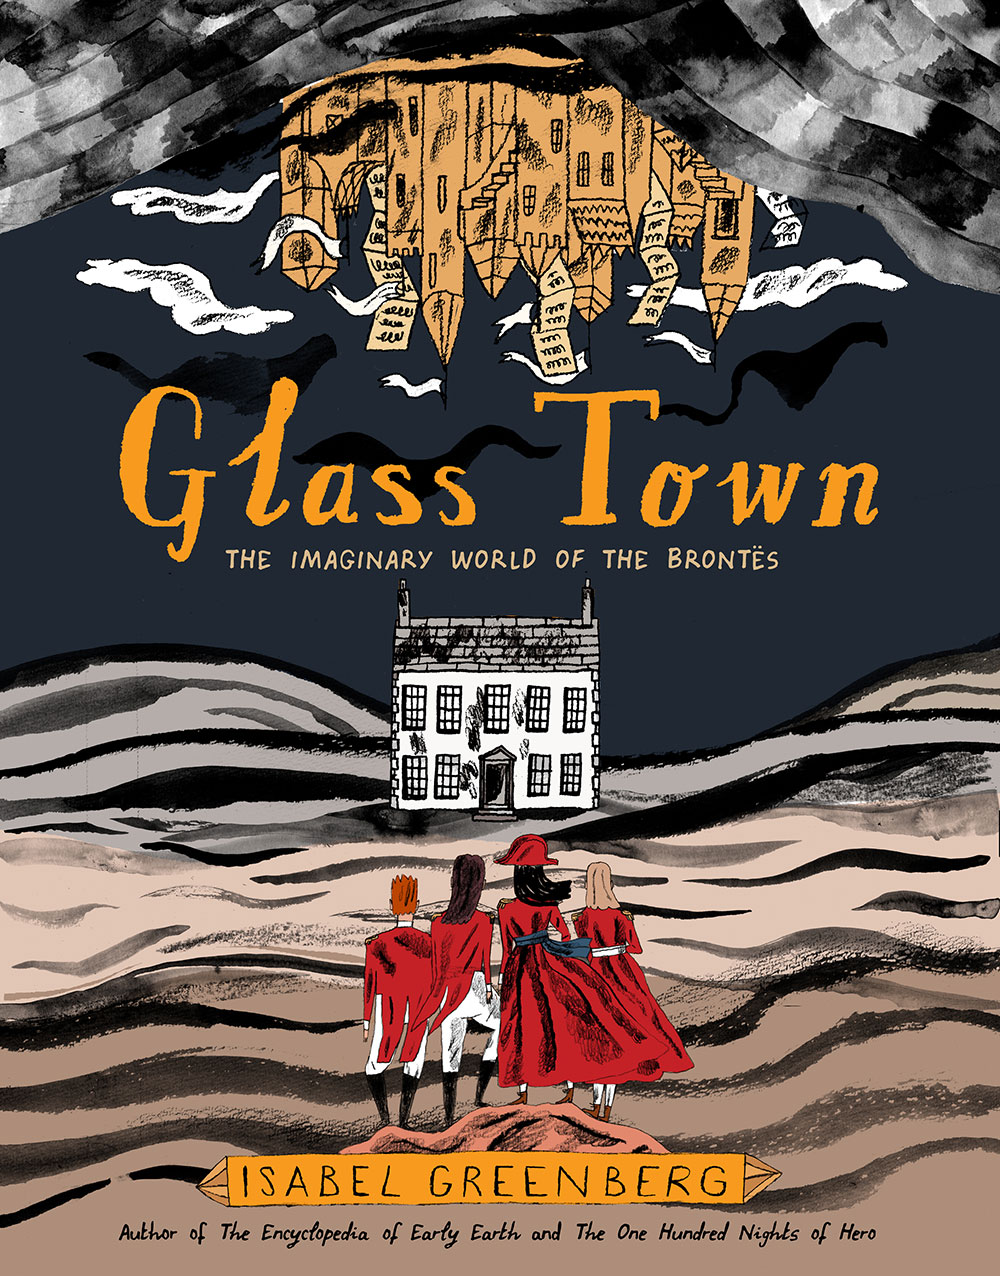 Glass Town: The Imaginary World of the Brontës by Isabel Greenberg